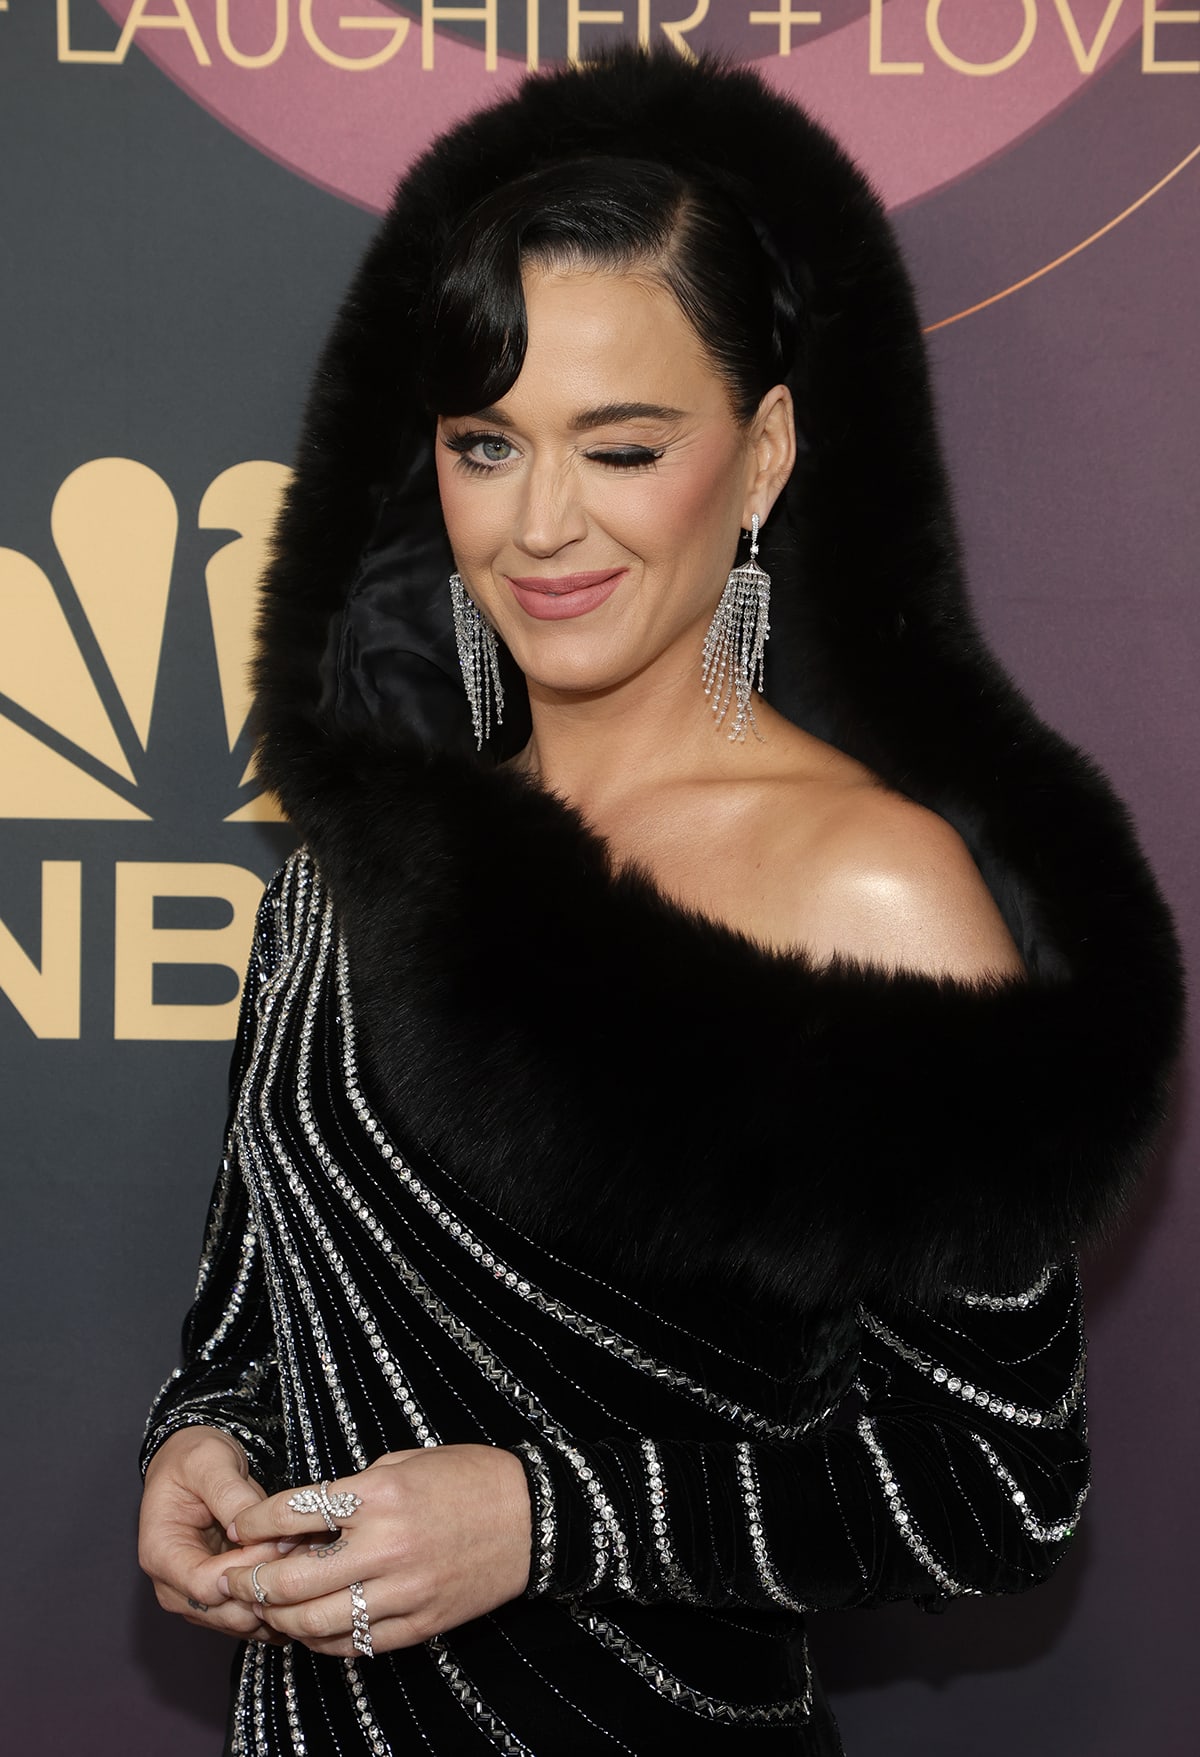 Katy Perry styles her look with Vera Belleza diamond chandelier earrings and a Marli diamond ring